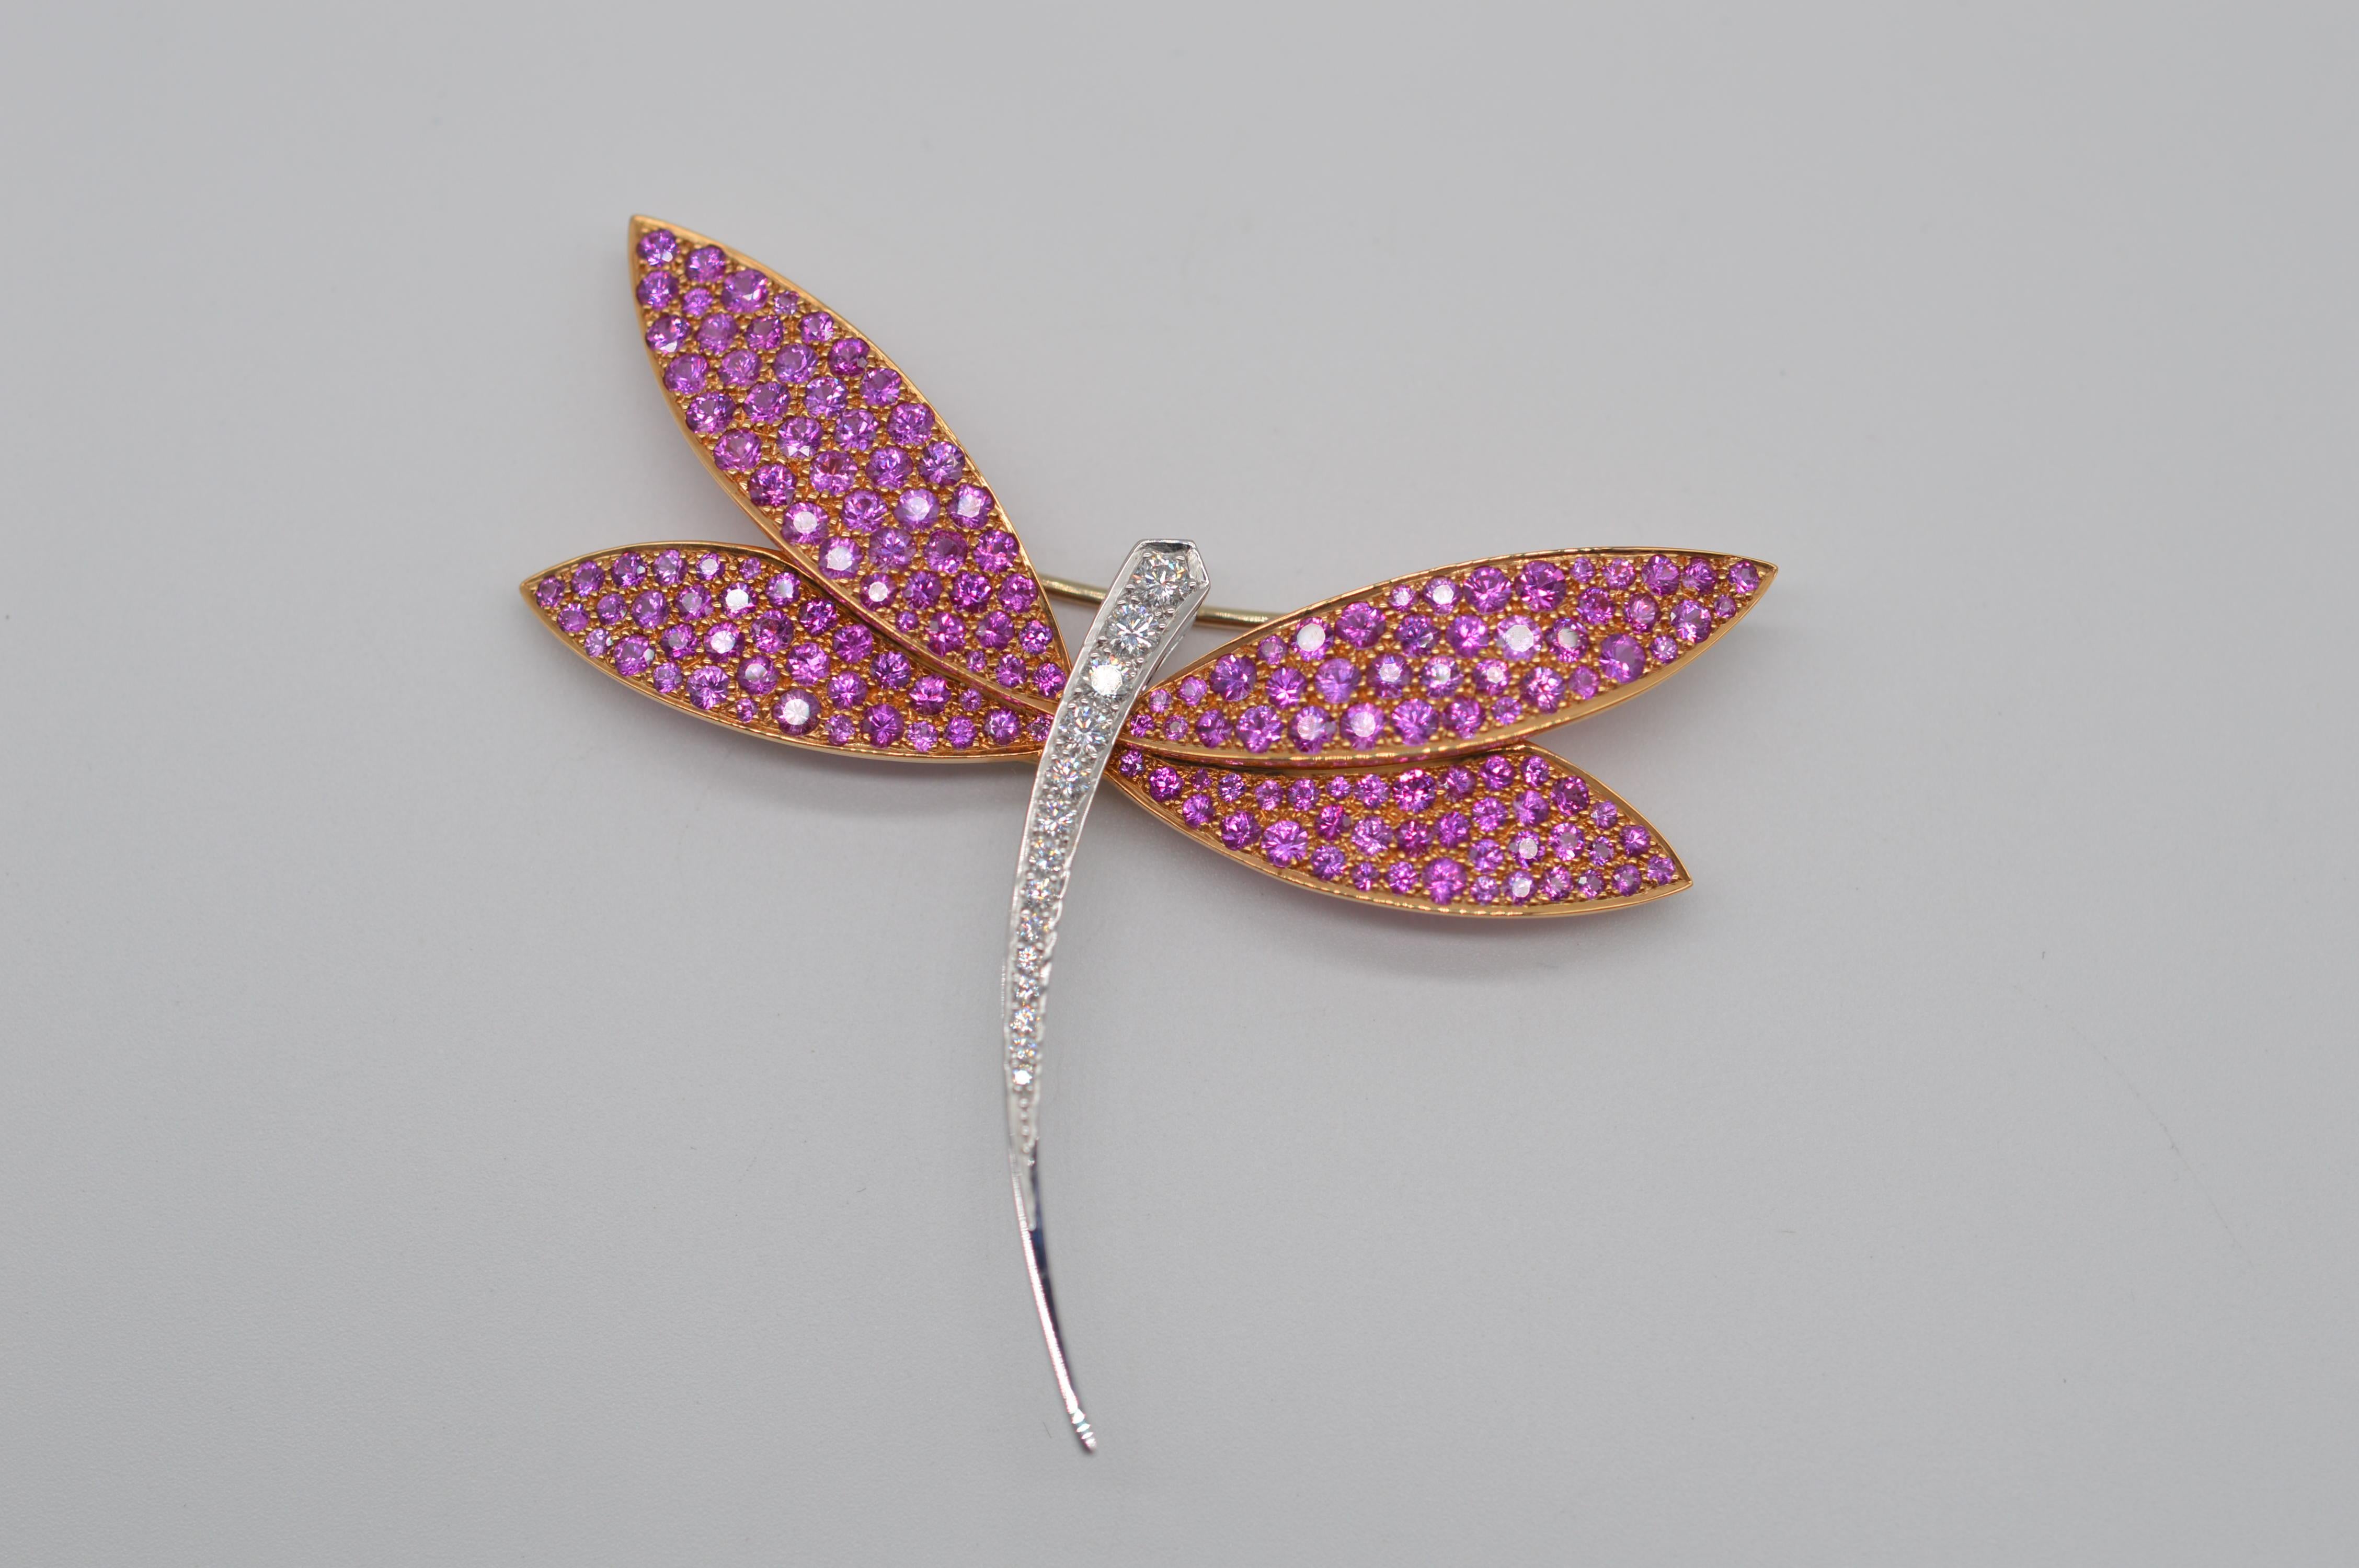 Van Cleef & Arpels Dragonfly Brooch Unworn
18K Yellow & White Gold 
Weight 16.5 grams
Diamonds & Pink Sapphires Setting
Seti with 14 Round Diamond for an approximative weight of 0.50 carats (Color D-E / Clarity VVS1-VVS2) / Set with 158 Pink